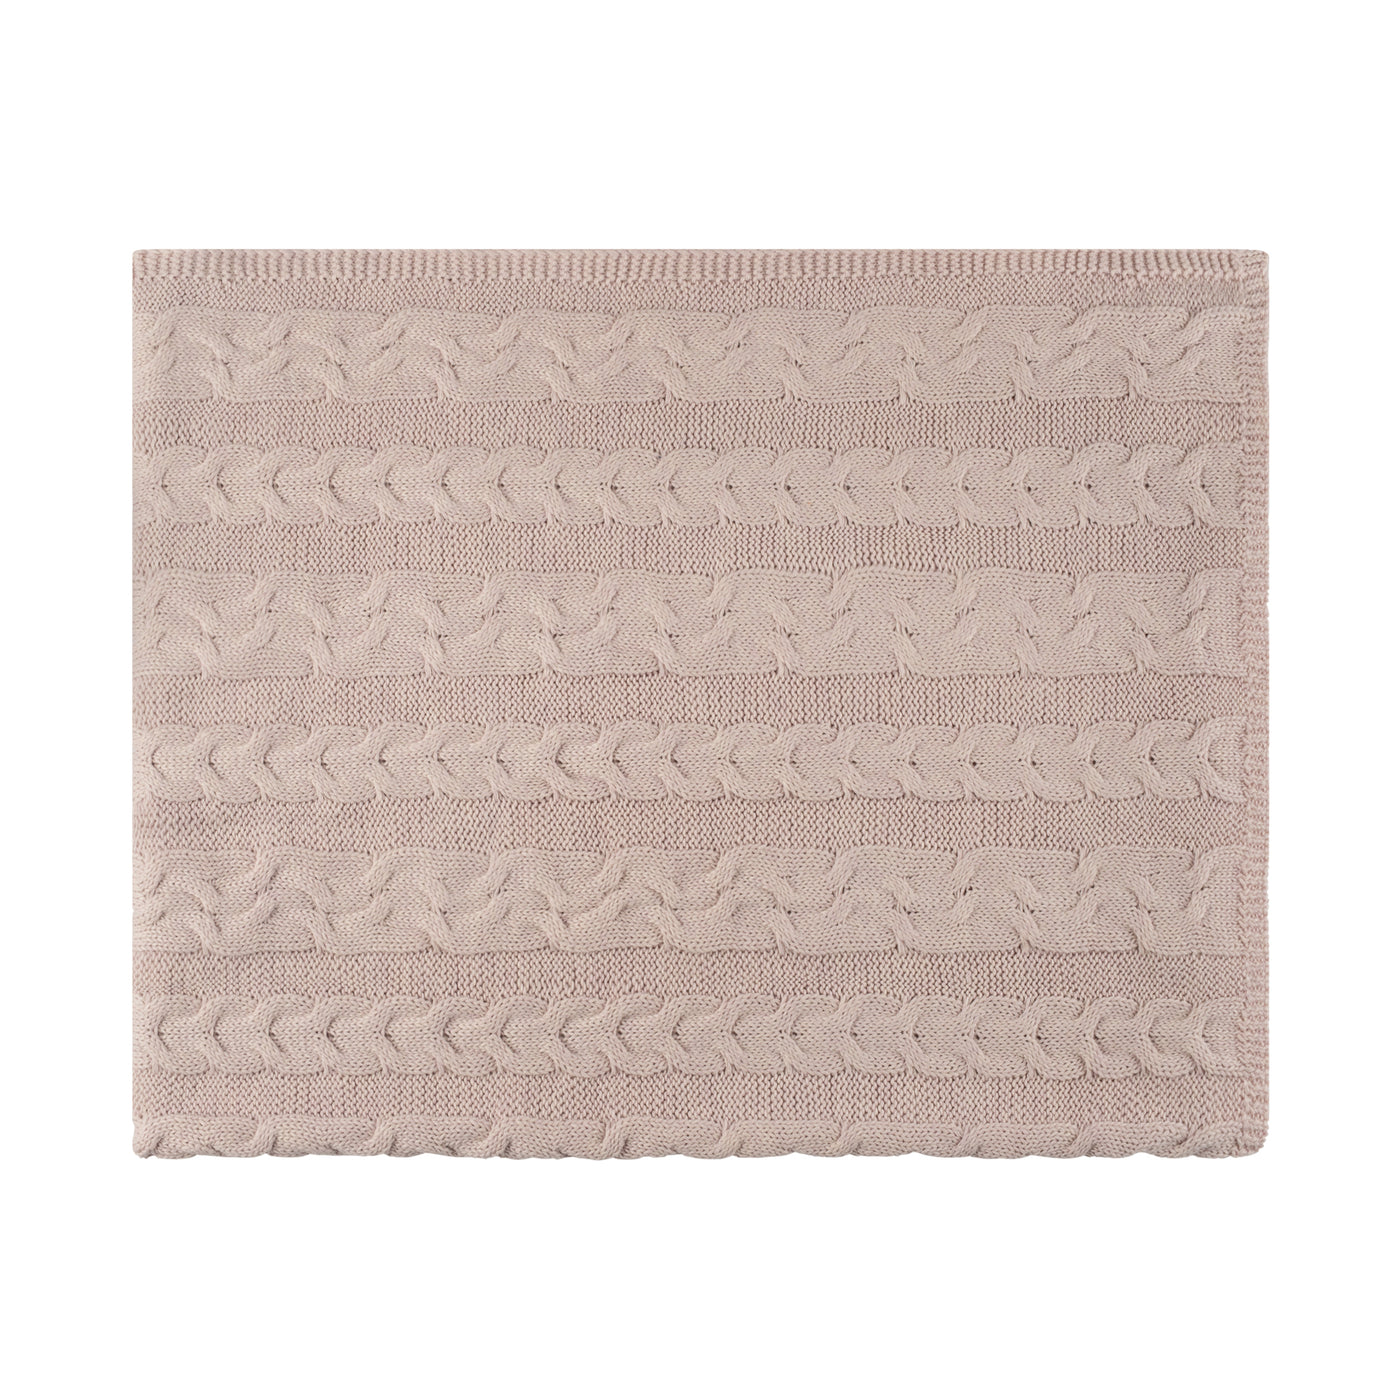 Pippin Cashmere Feel Cableknit Blush Blanket